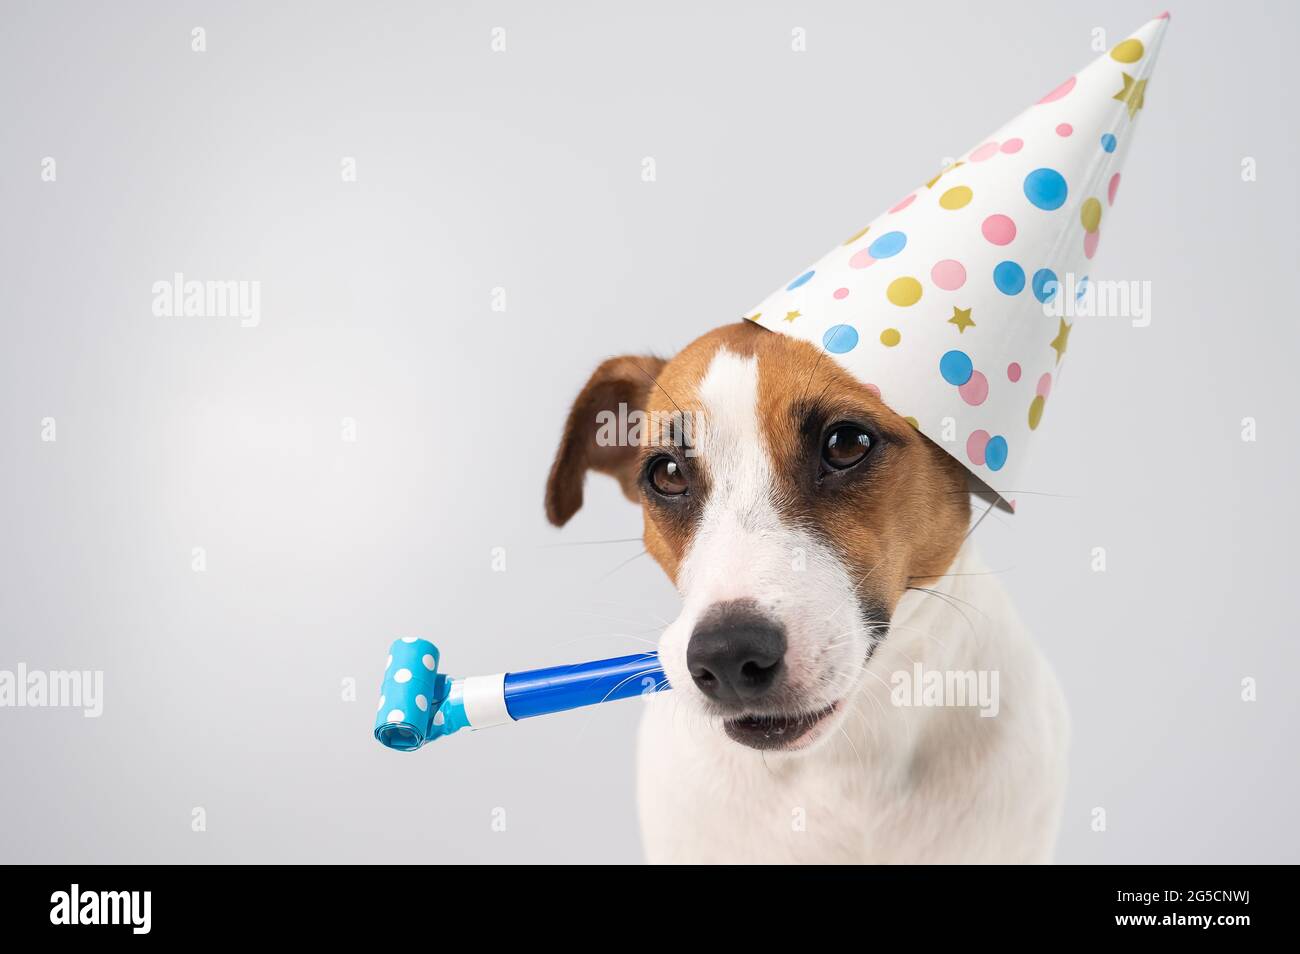 Funny Jack Russell Terrier dog wearing a birthday cap holding a whistle on  a white background Stock Photo - Alamy